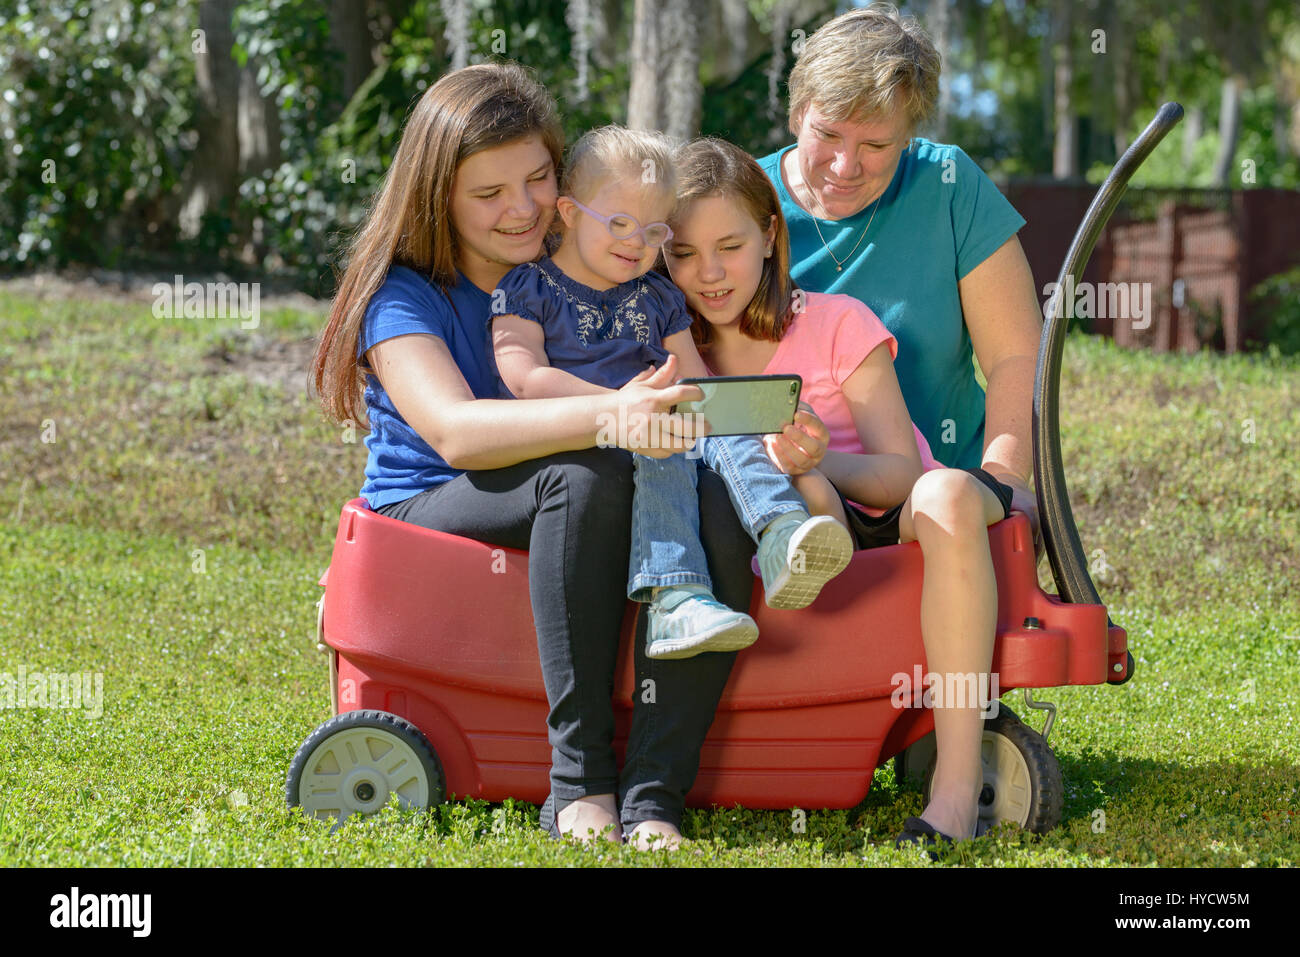 Mother and daughters down syndrome Stock Photo